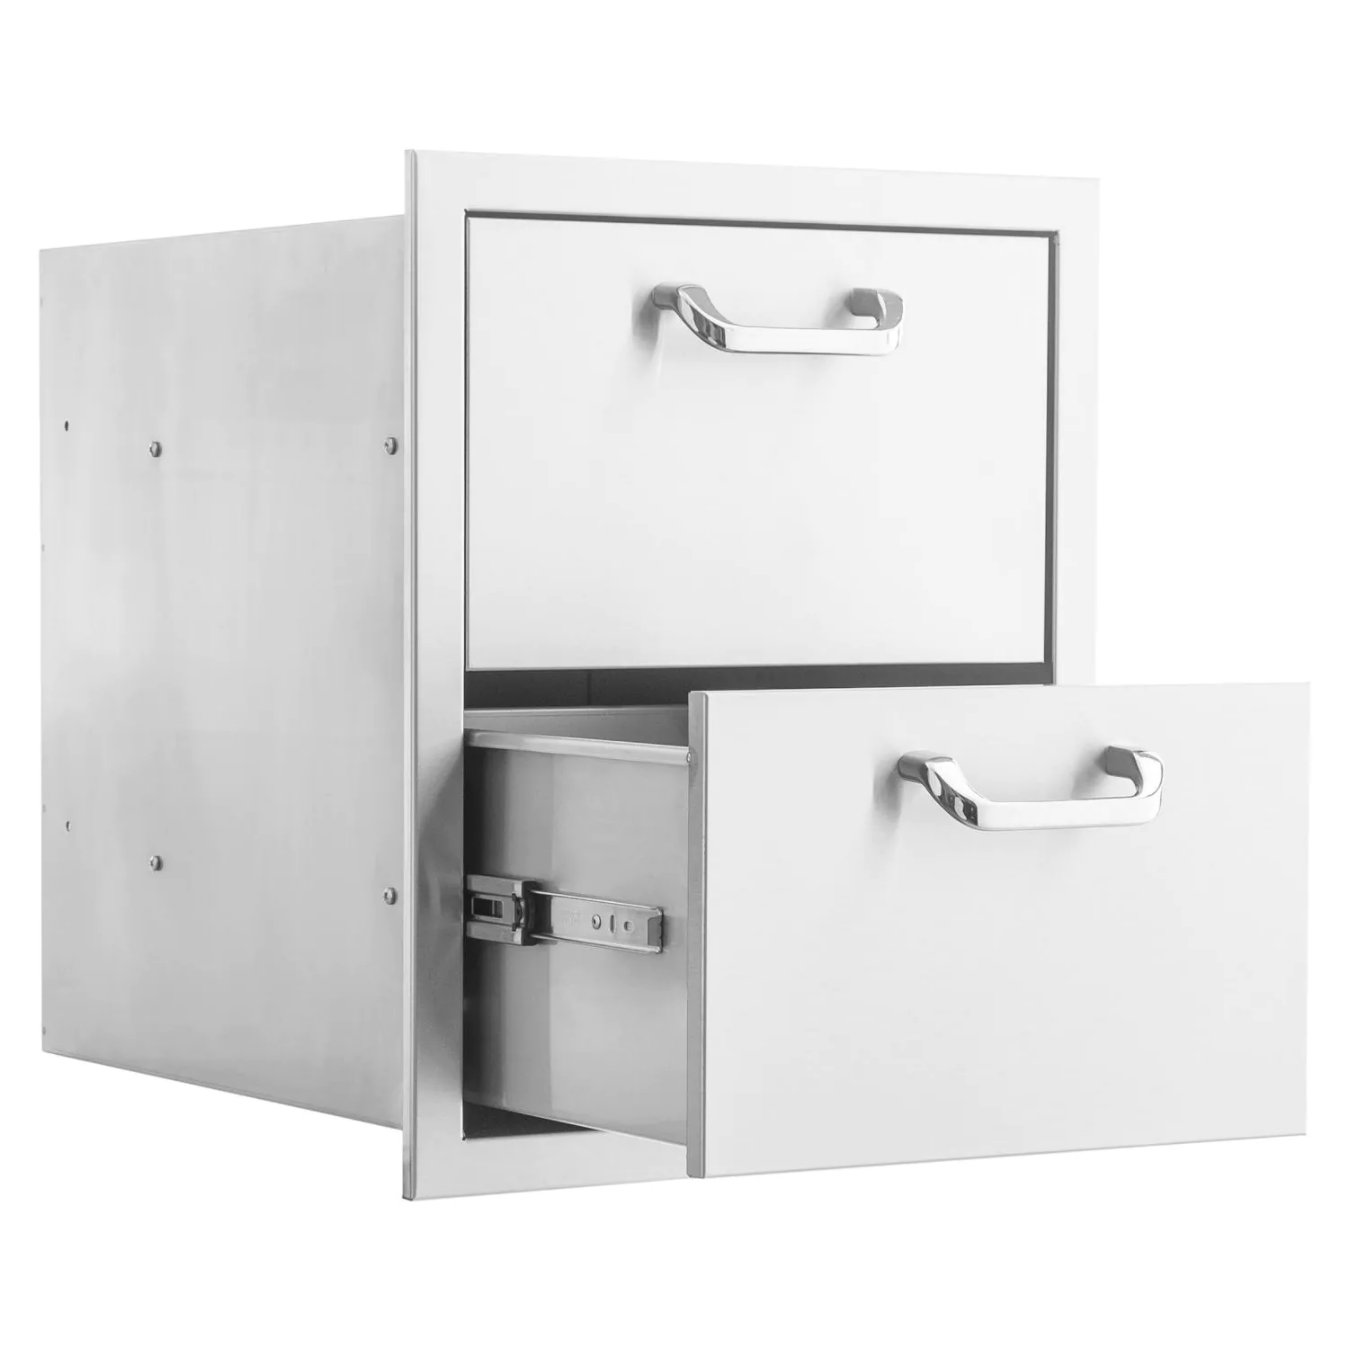 PCM 260 Series 16" Stainless Steel Double Access Drawer